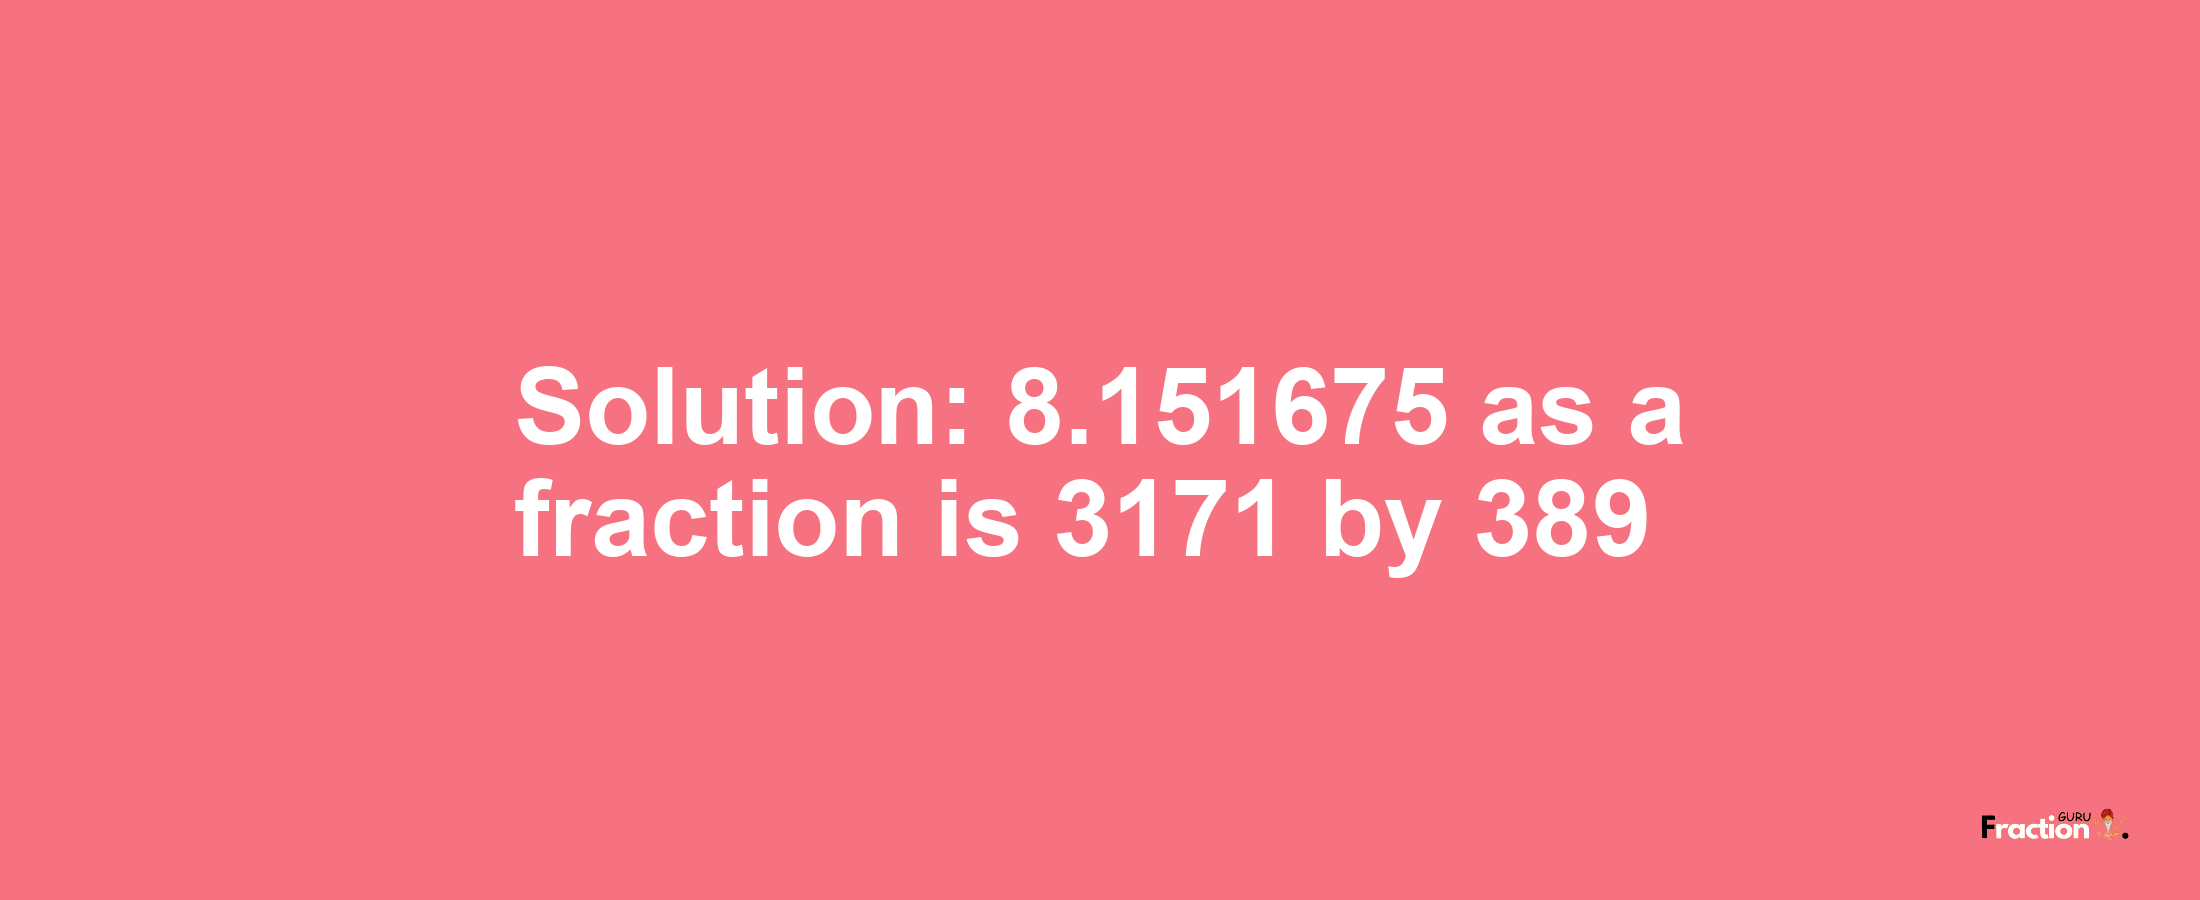 Solution:8.151675 as a fraction is 3171/389